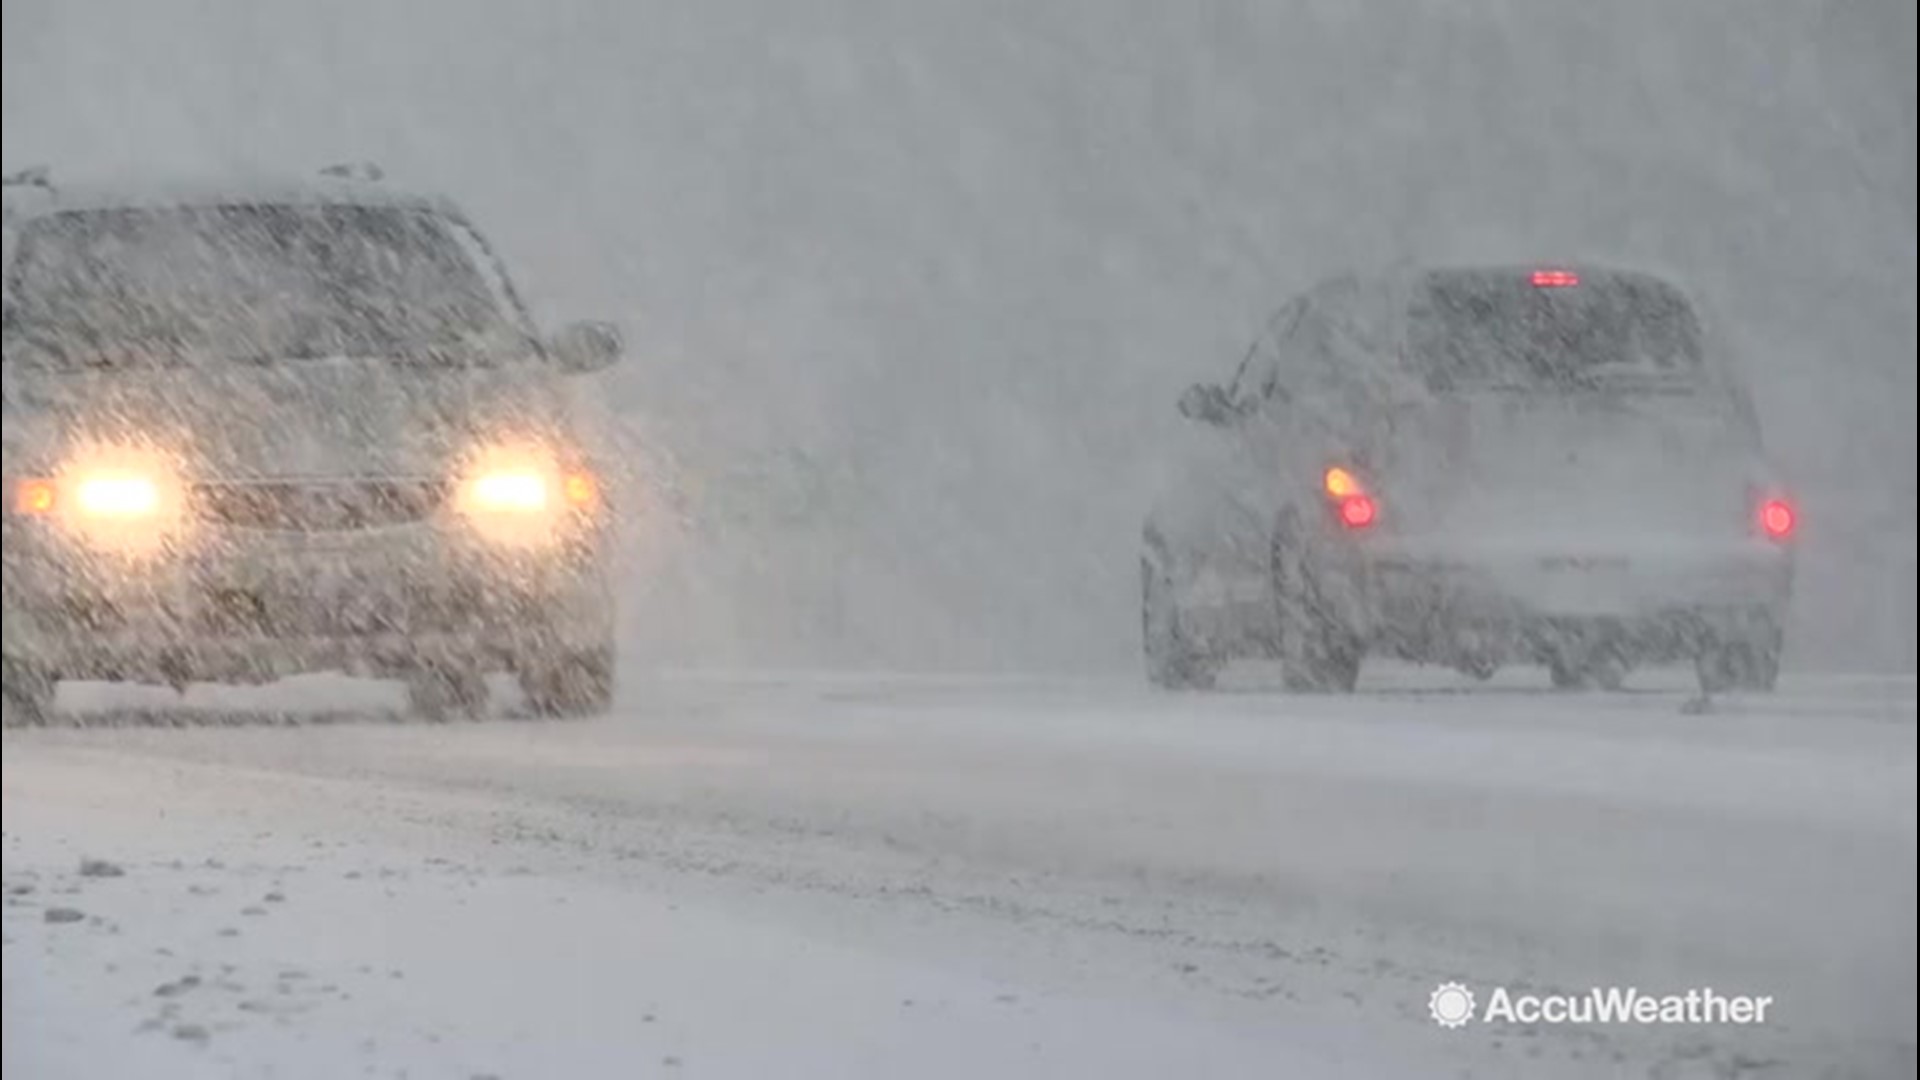 Drivers on Highway 51 near Pana, Illinois, were slowed down when snow piled up on the roads as a storm moved through on Dec. 15.